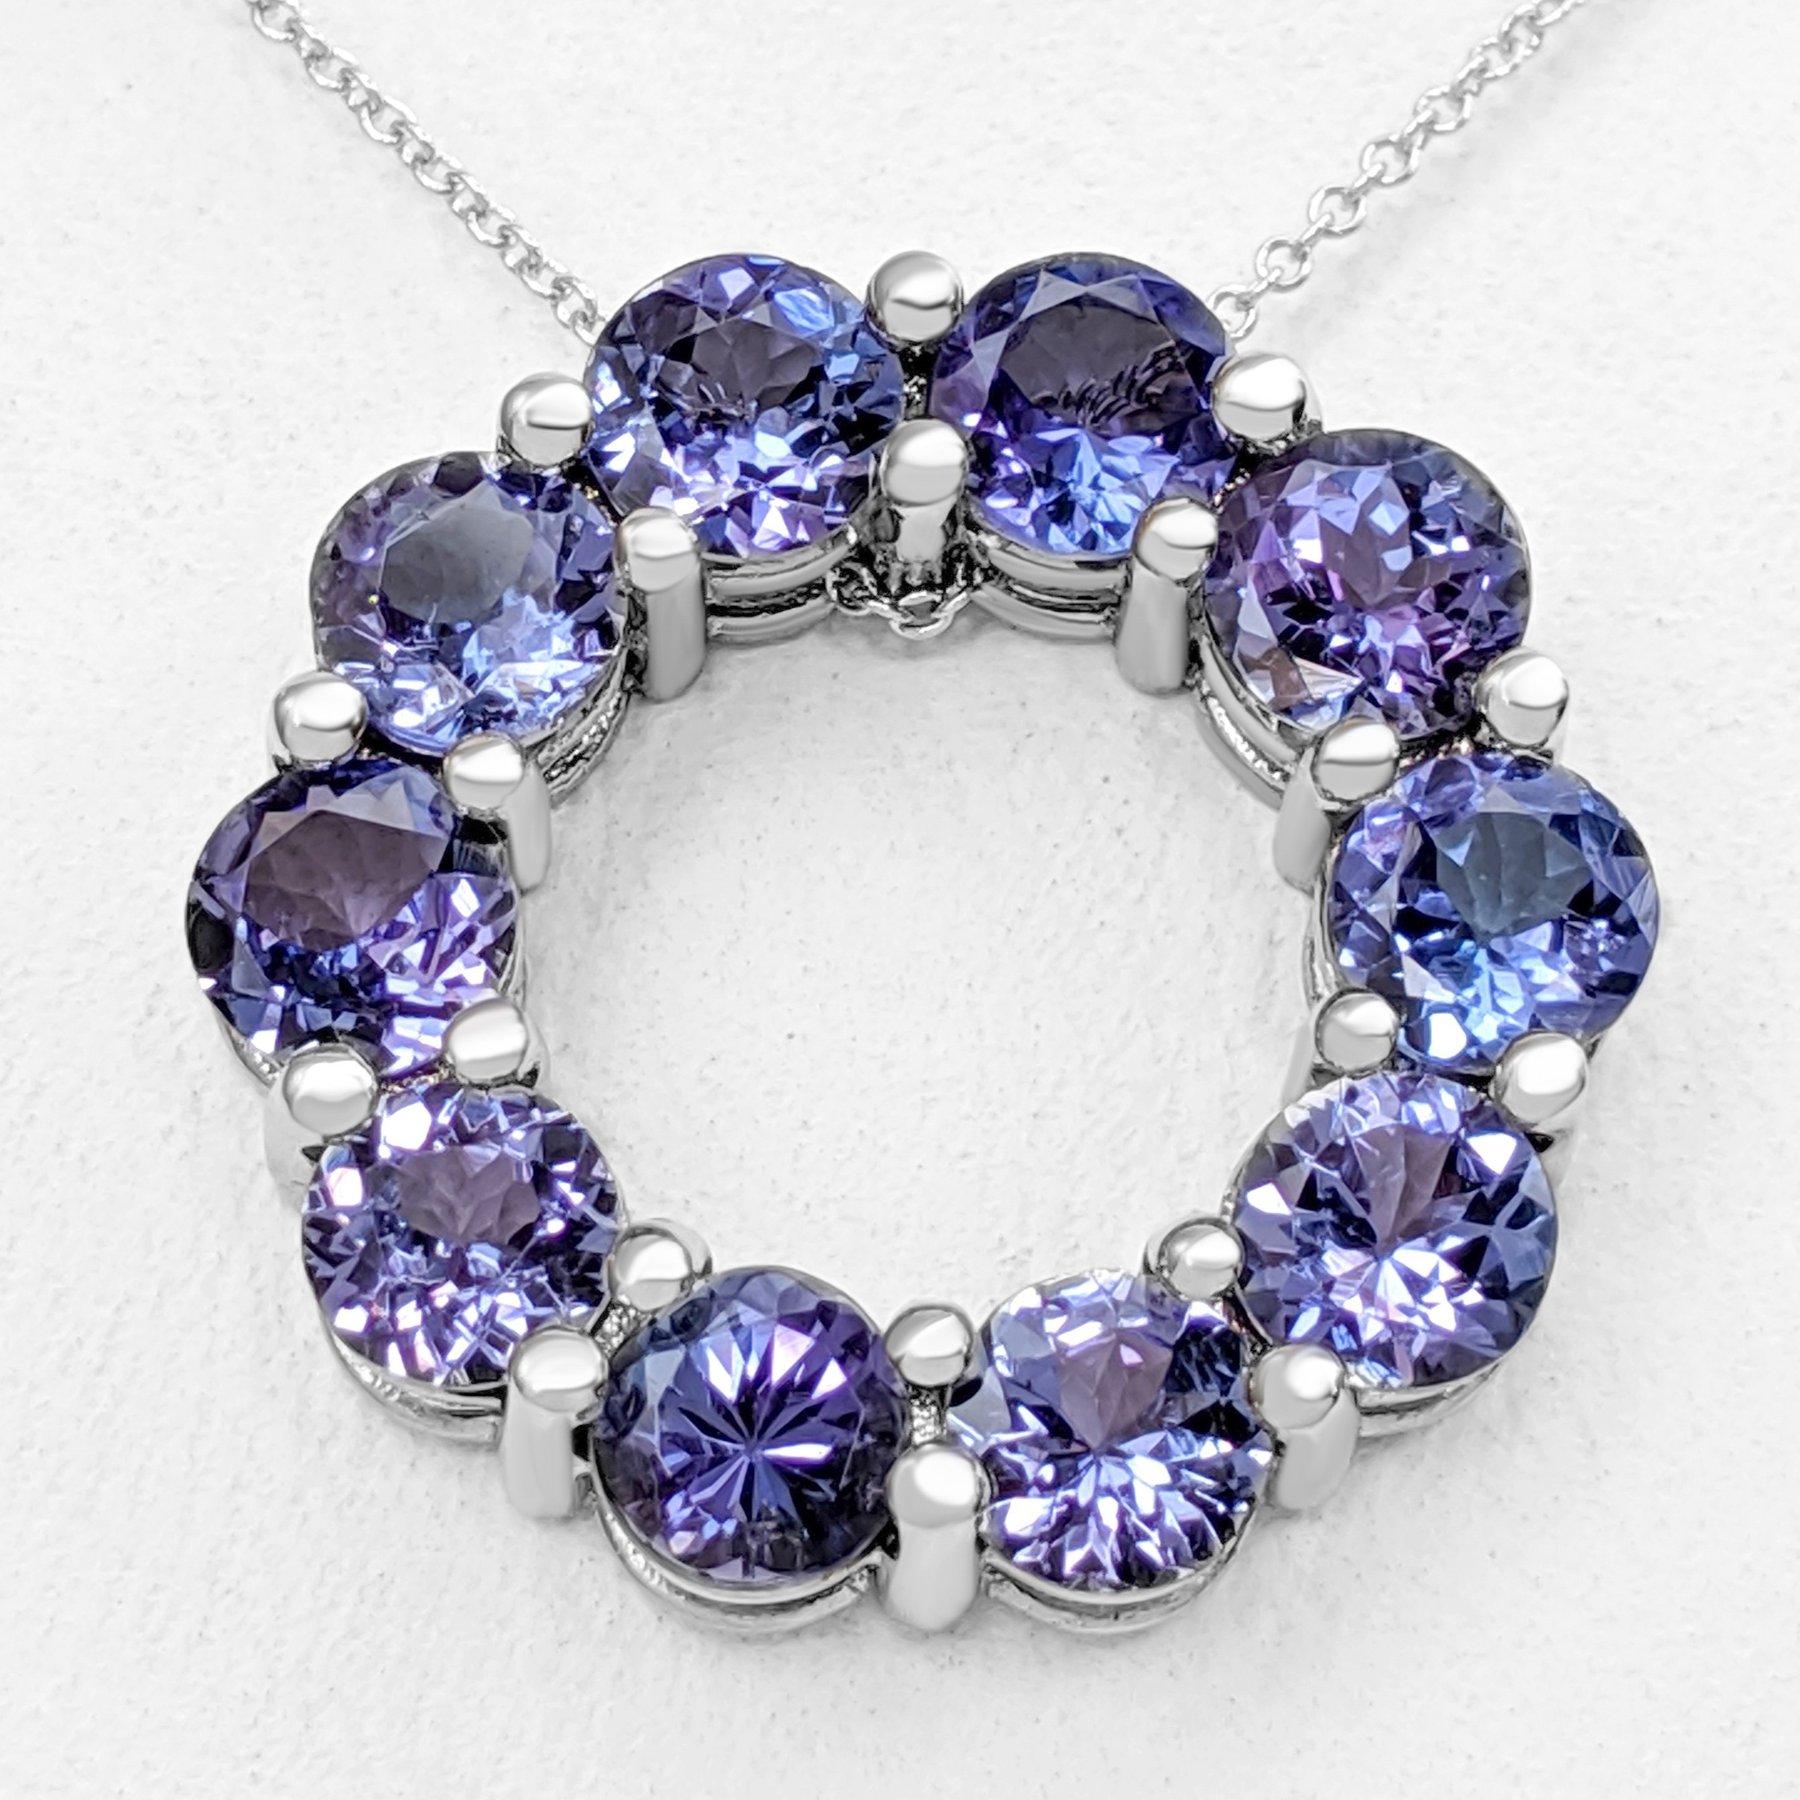 Round Cut $1 NO RESERVE!   5.23cttw Tanzanite, 14K White Gold Necklace With Pendant